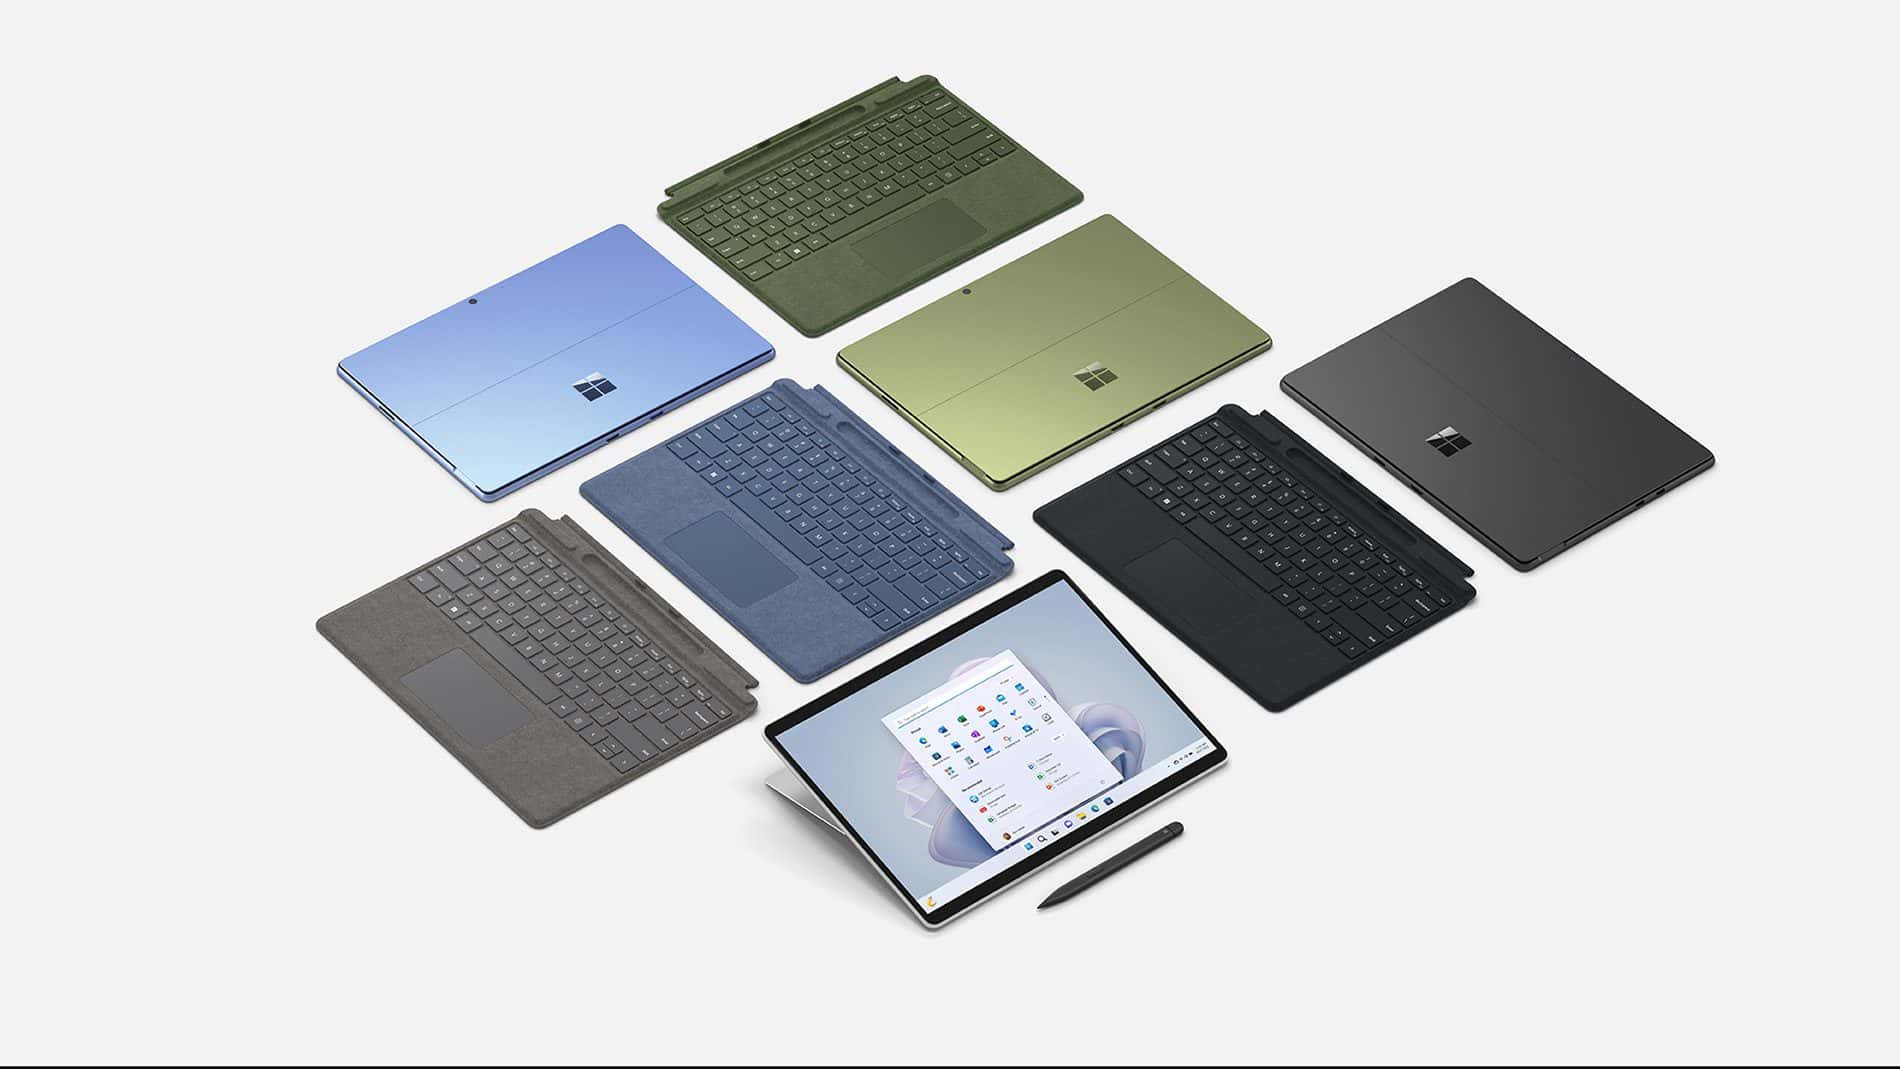 Microsoft reveals when it will deliver broad availability of Surface spare parts